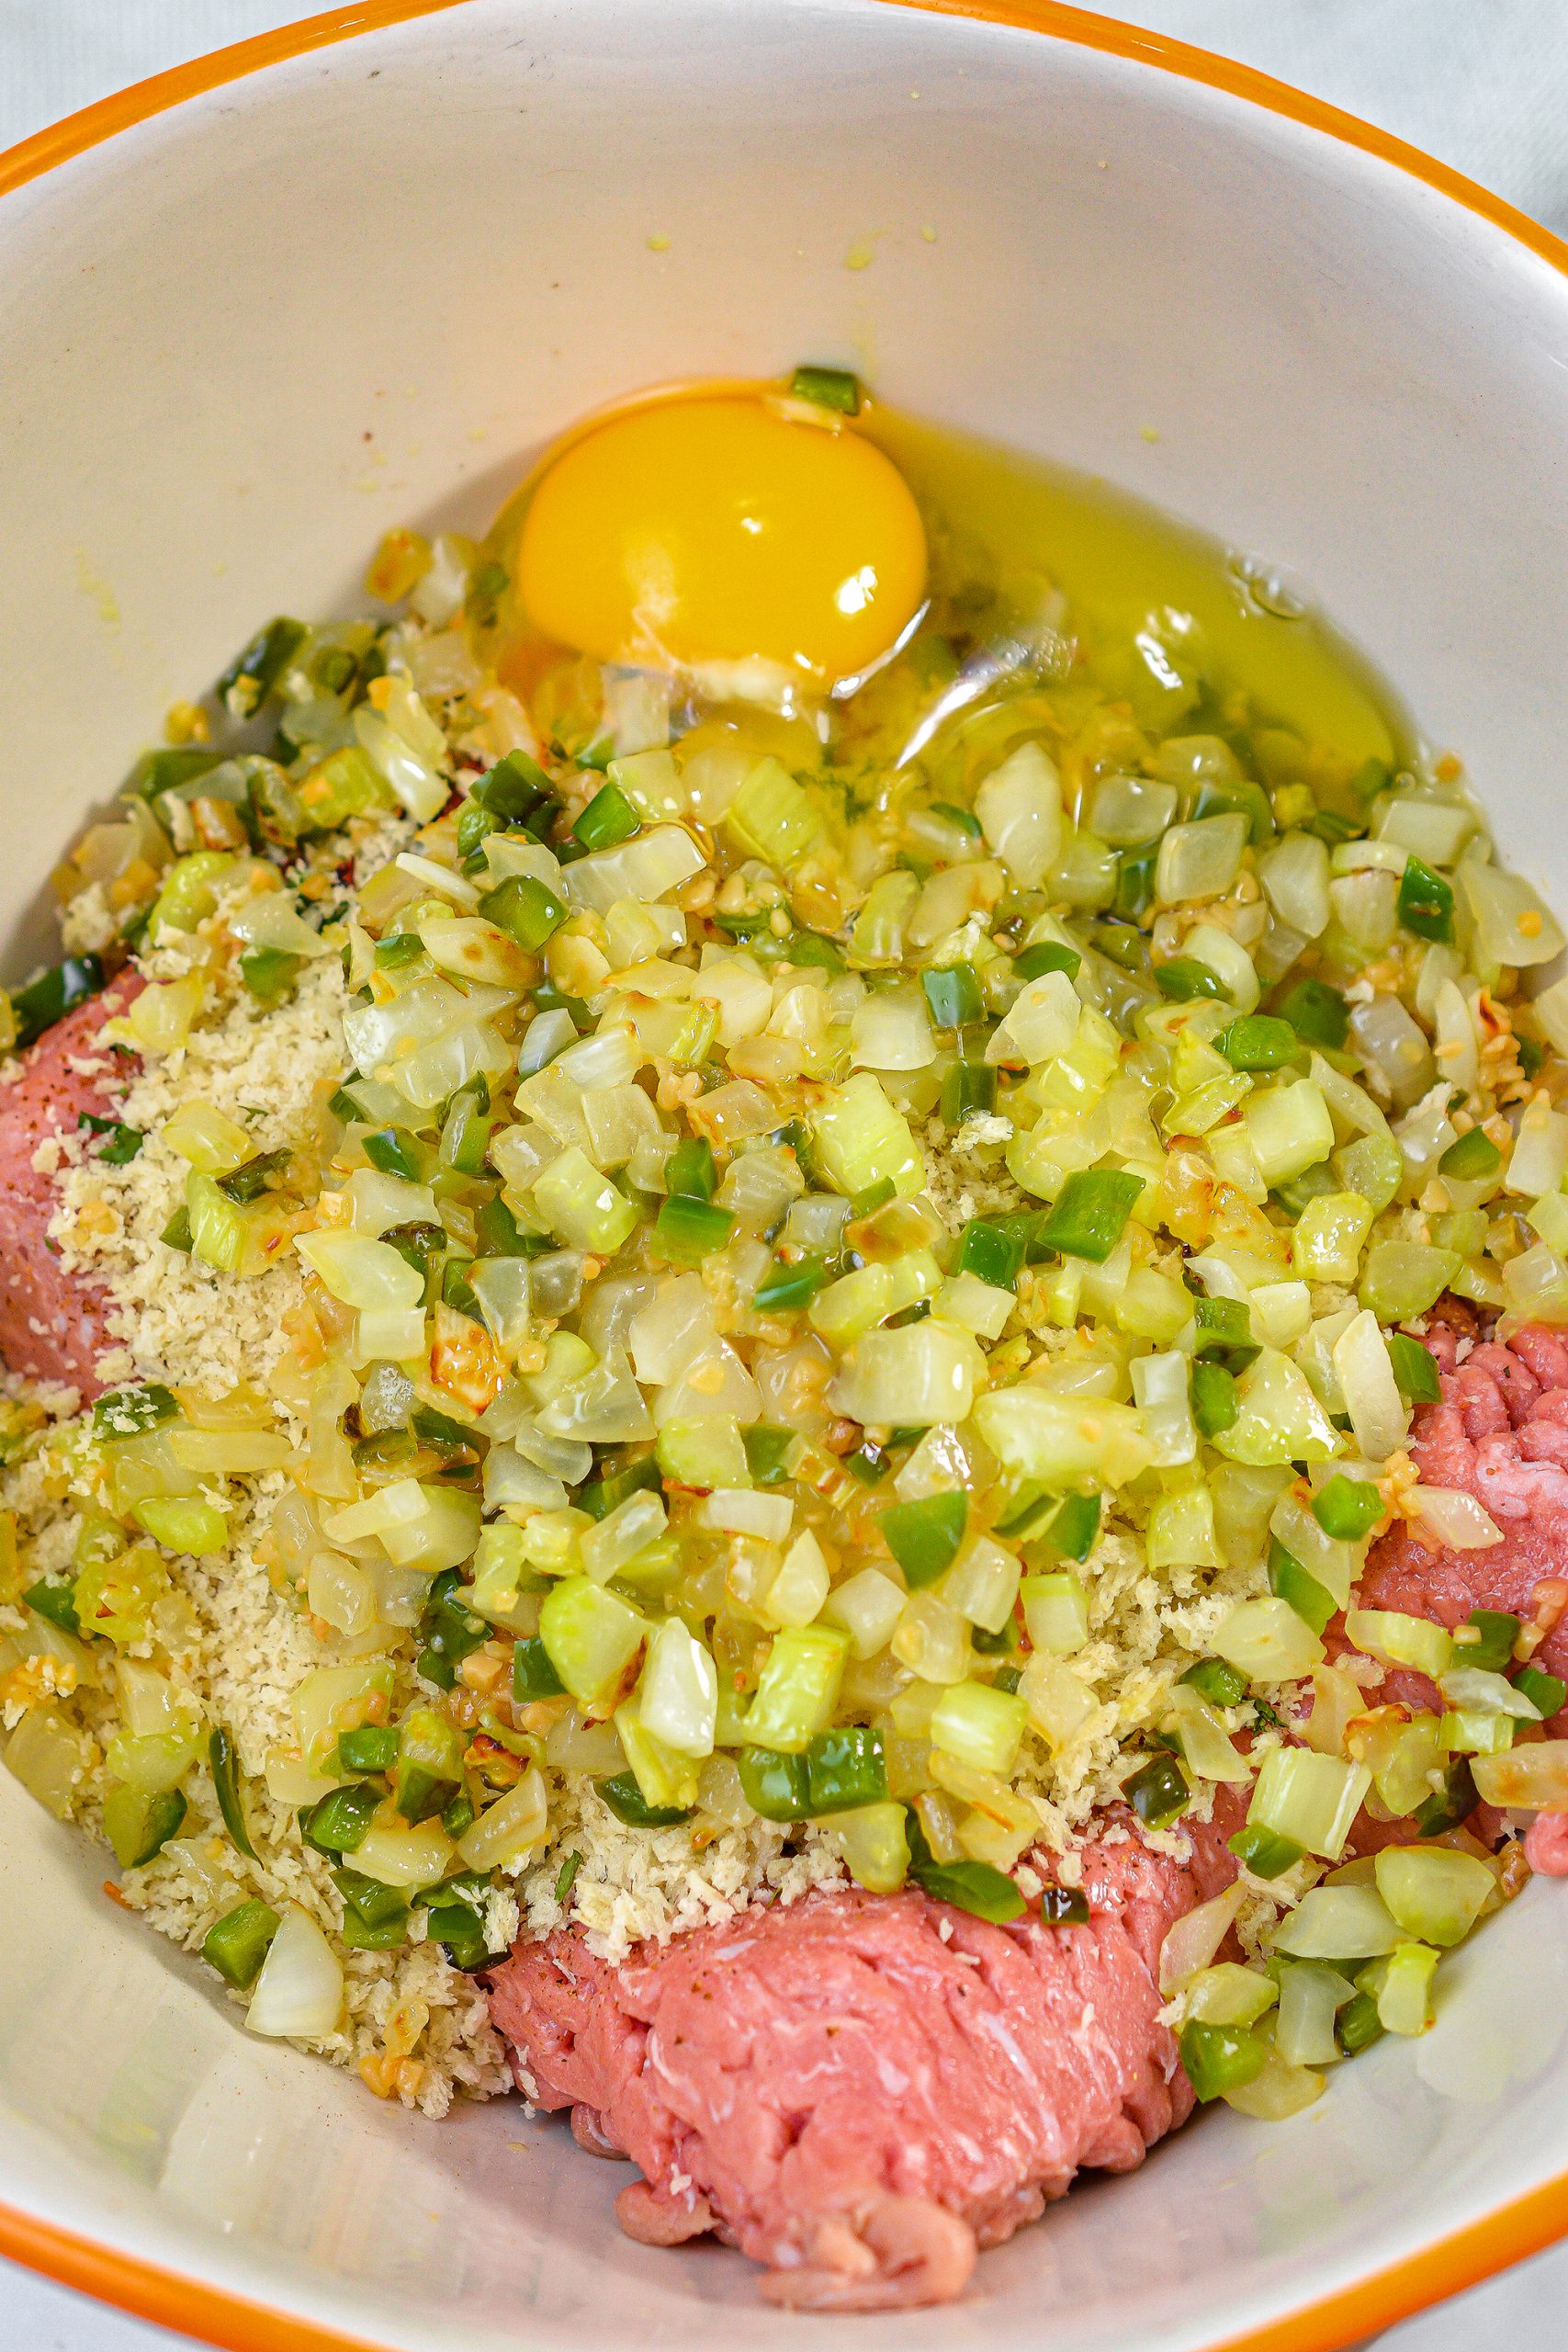 Add the cooled vegetables to a large mixing bowl with the ground turkey, cajun seasoning, 1 Tbsp chili flakes, chopped parsley, large egg, panko crumbs and salt and pepper to taste.